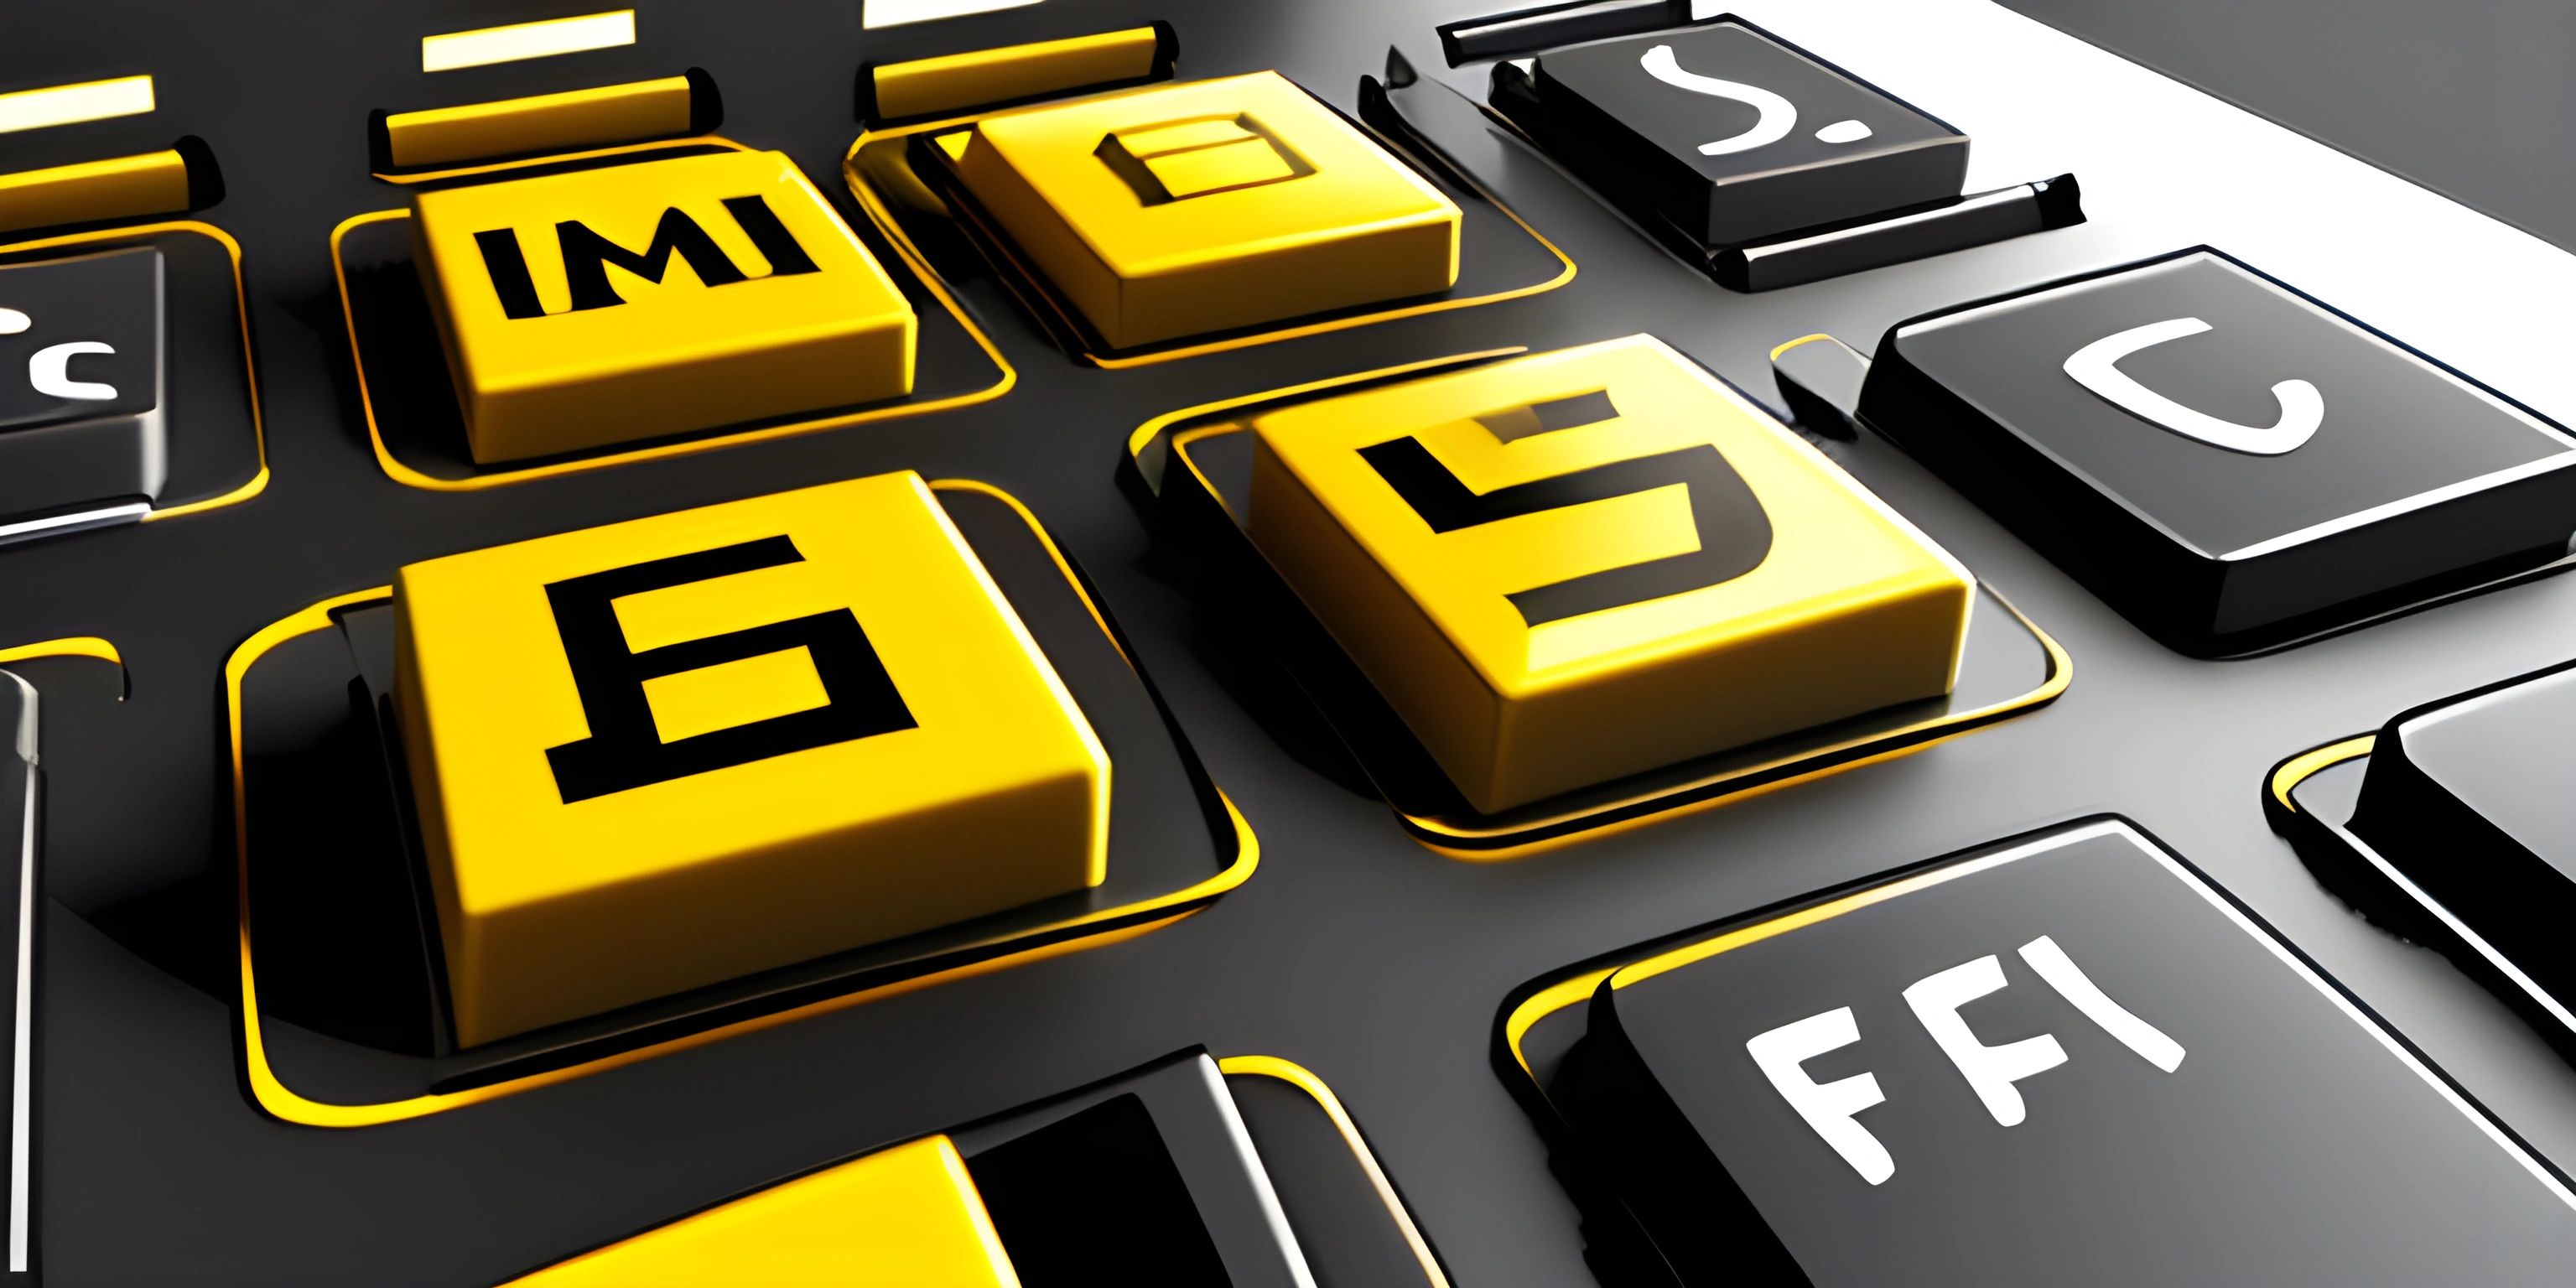 a keyboard with different letters on the top keyboard keys and a yellow keypad that says time